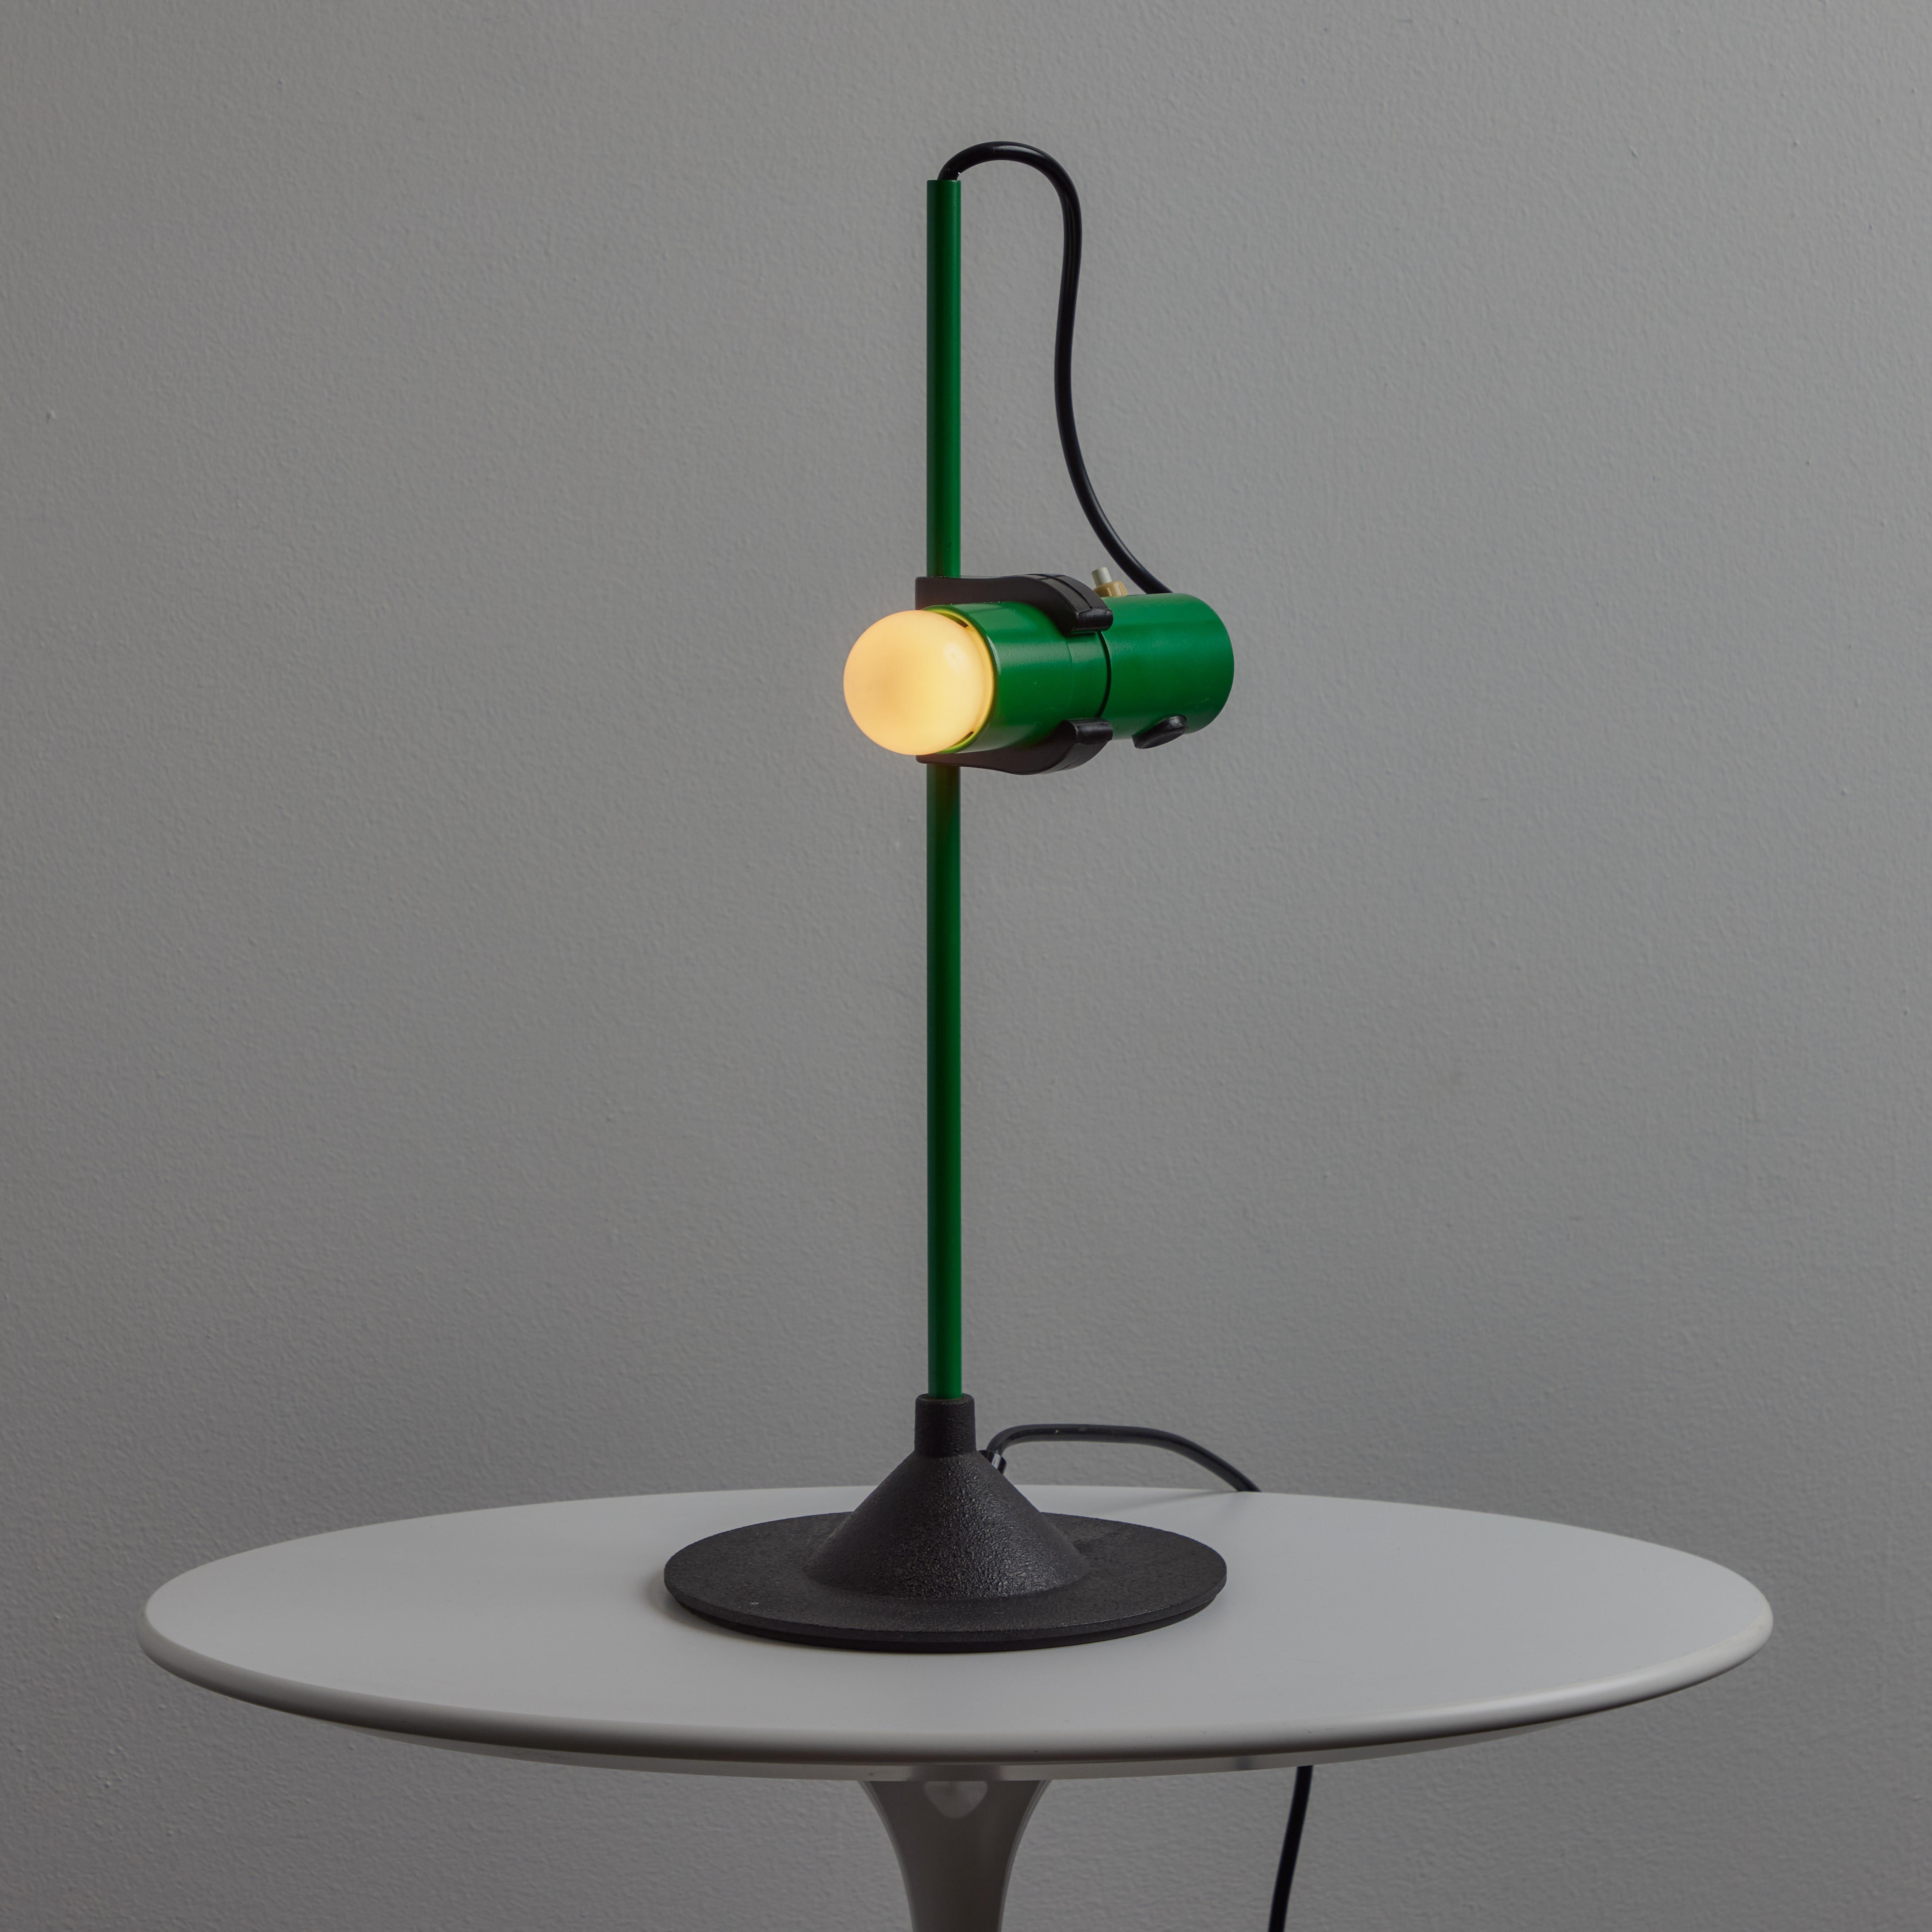 1980s Barbieri & Marianelli Green Table Lamp for Tronconi. Executed in painted aluminum with black cast iron base. A surprisingly simple yet refined design for its time, this highly sculptural table lamp can be easily adjusted to various angles and